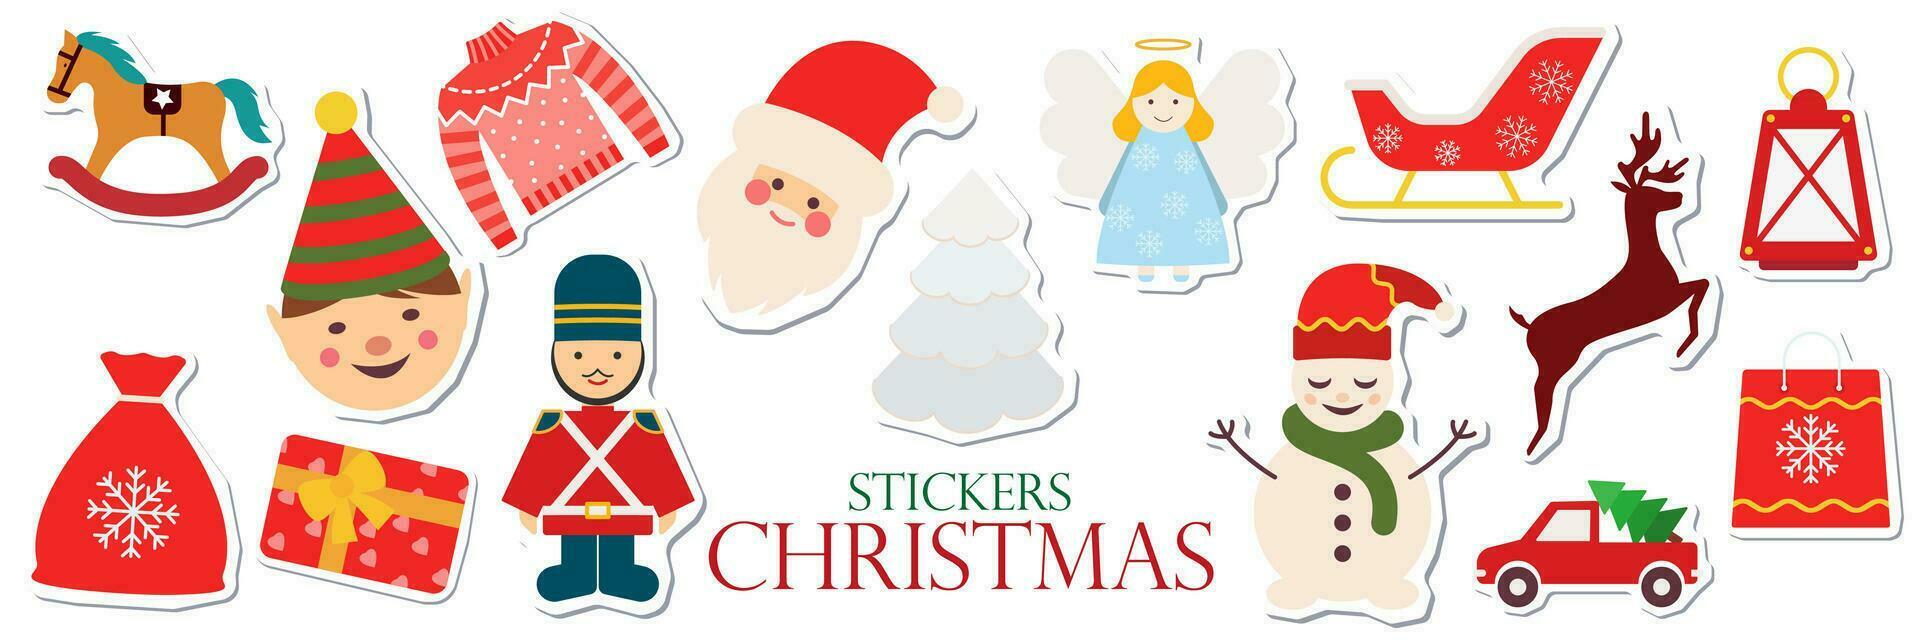 Christmas stickers large set. Vintage christmas and Happy New Year elements. Vector illustration. Isolated on brown background.